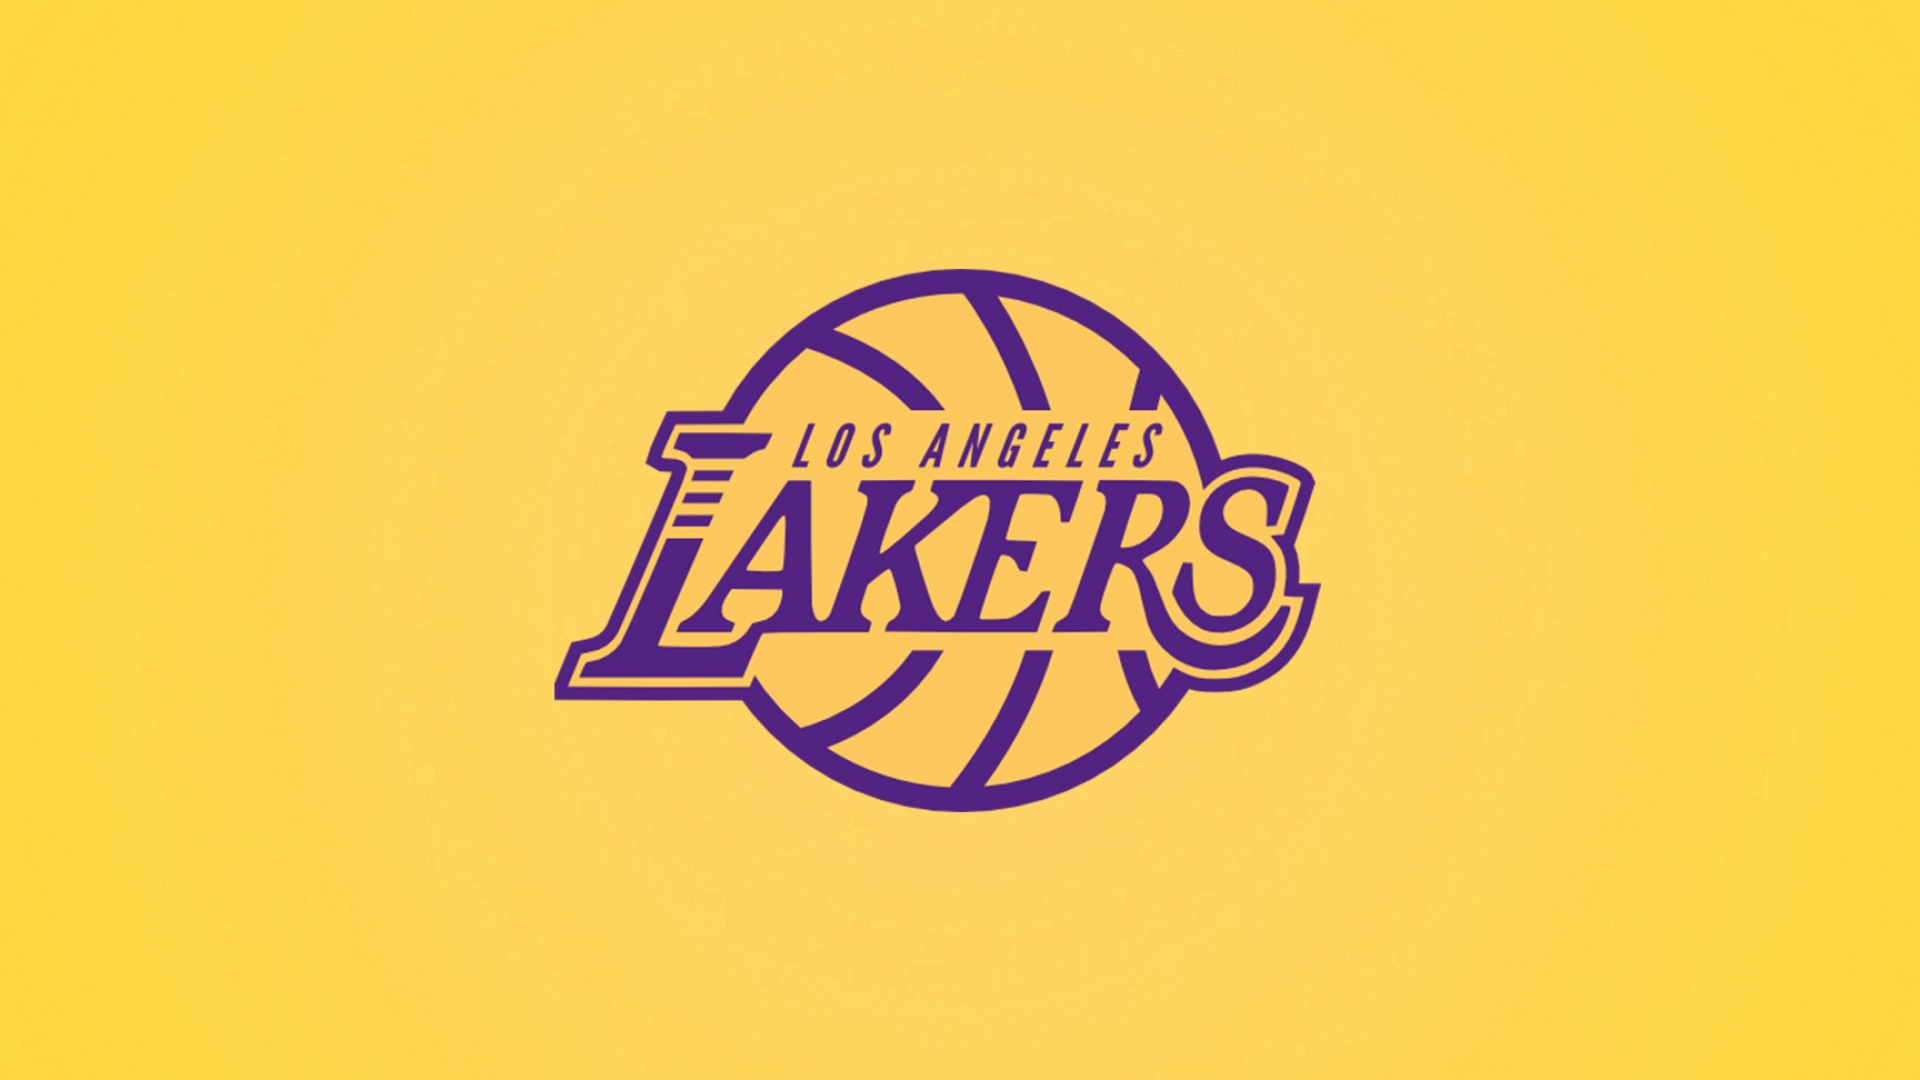 Los Angeles Lakers: The team won 60 games in the 1972–73 season, and took Pacific Division title. 1920x1080 Full HD Wallpaper.